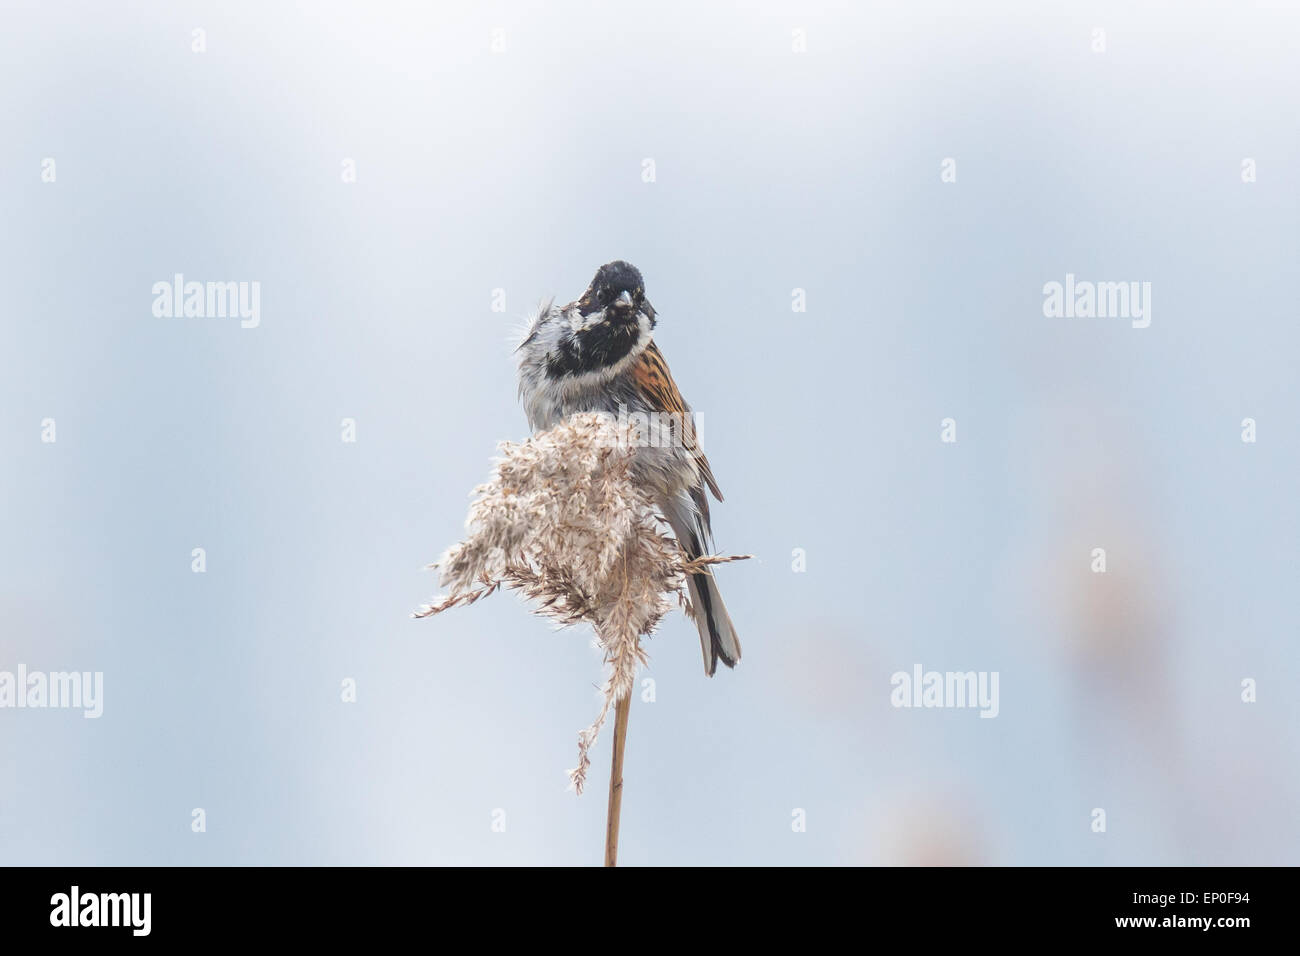 A common reed bunting Emberiza schoeniclus sings a song on a reed plume Phragmites australis. The reed beds waving due to strong Stock Photo